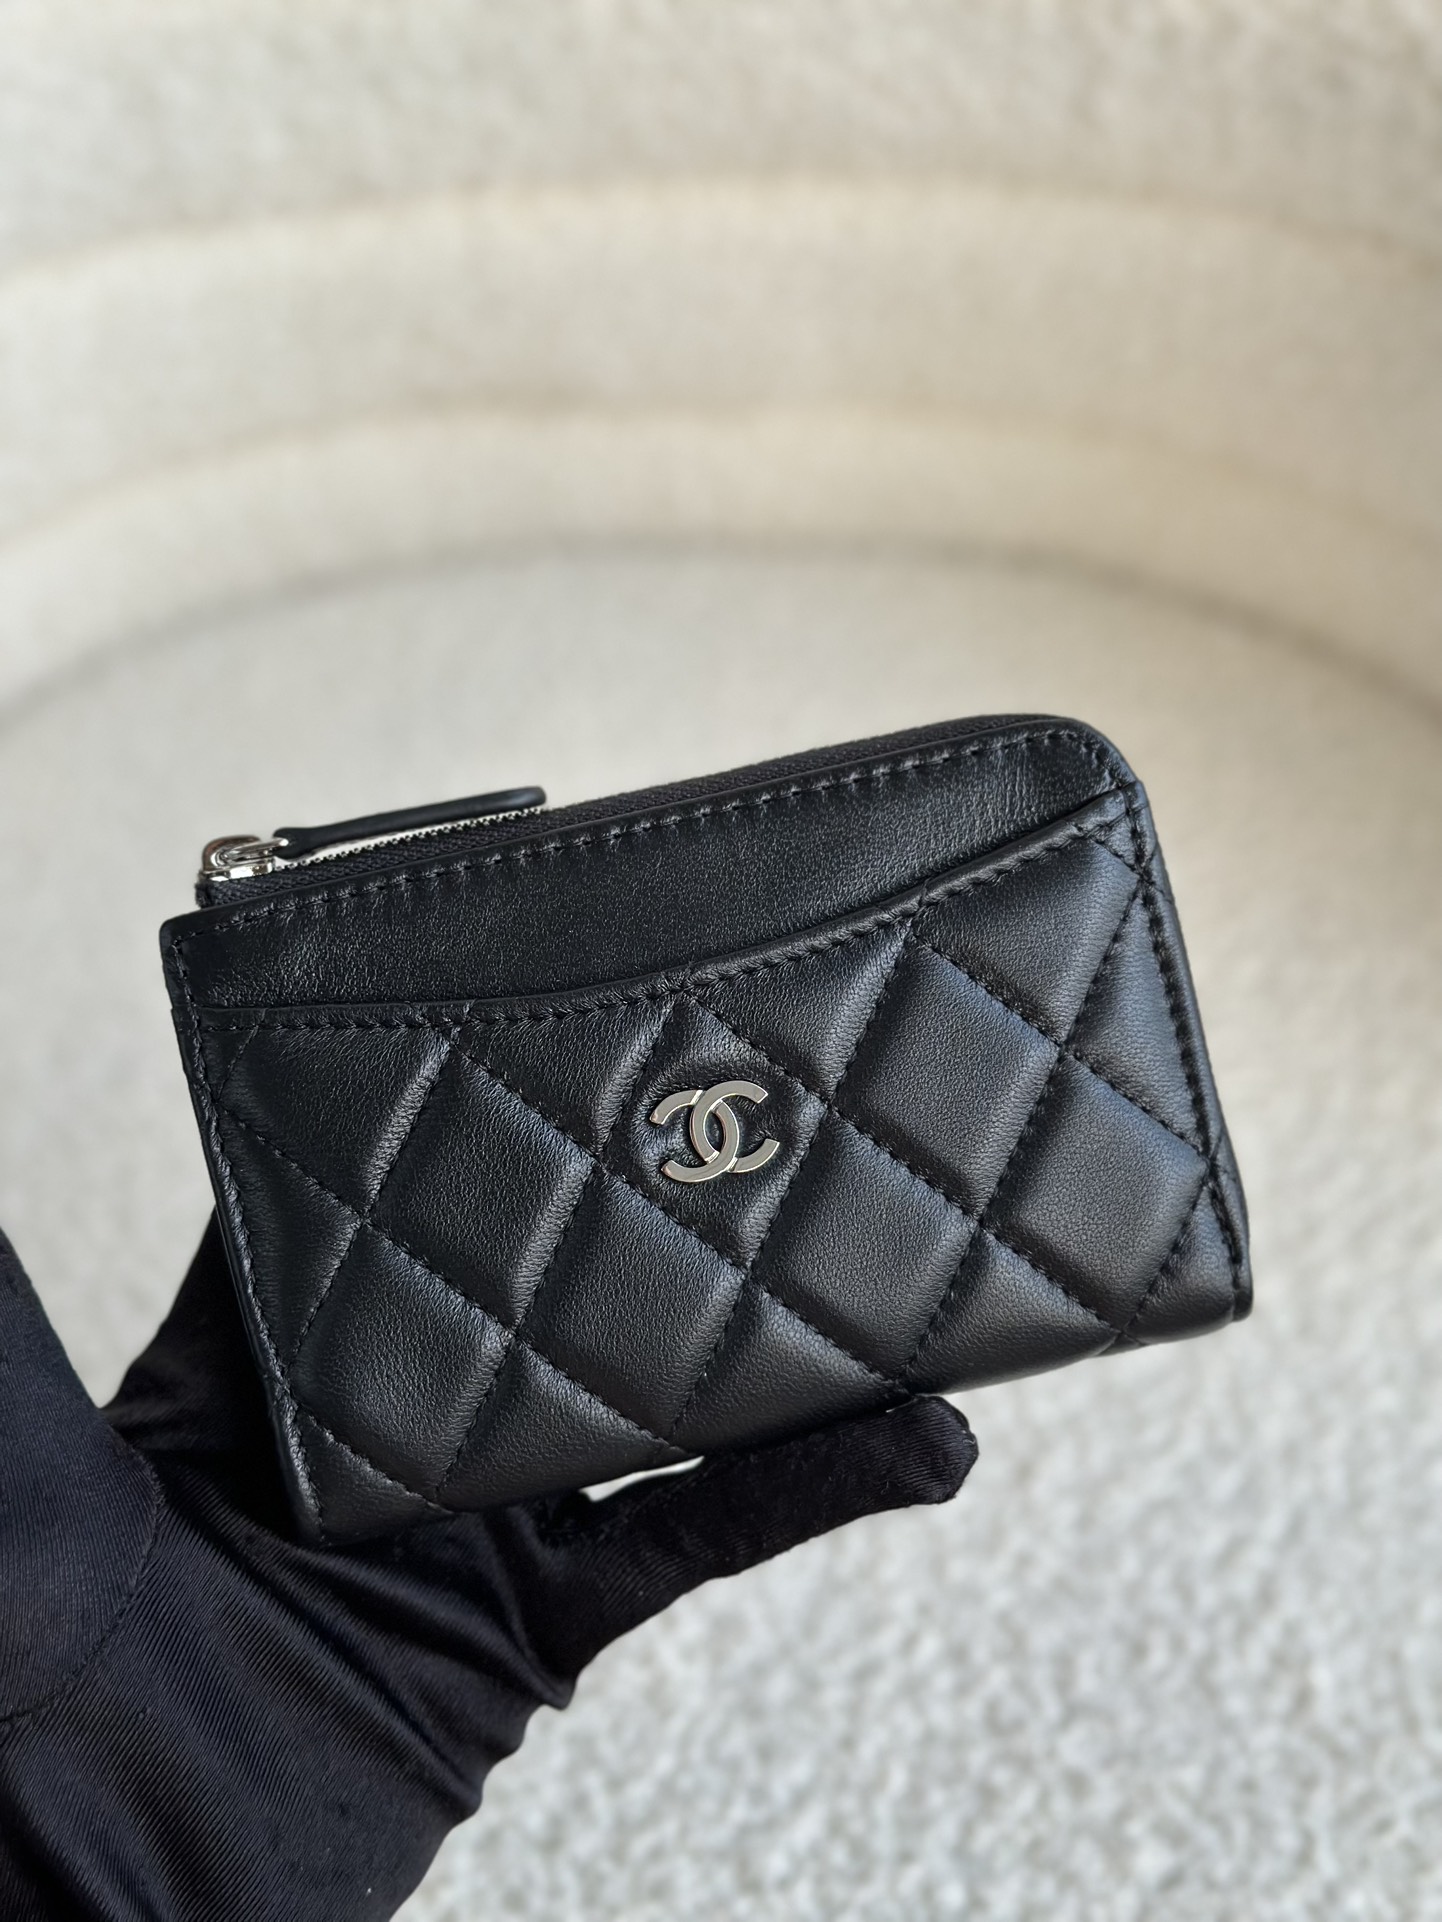 Where can I buy the best quality
 Chanel Classic Flap Bag Wallet Shop Best High Authentic Quality Replica
 Black Silver Hardware Sheepskin